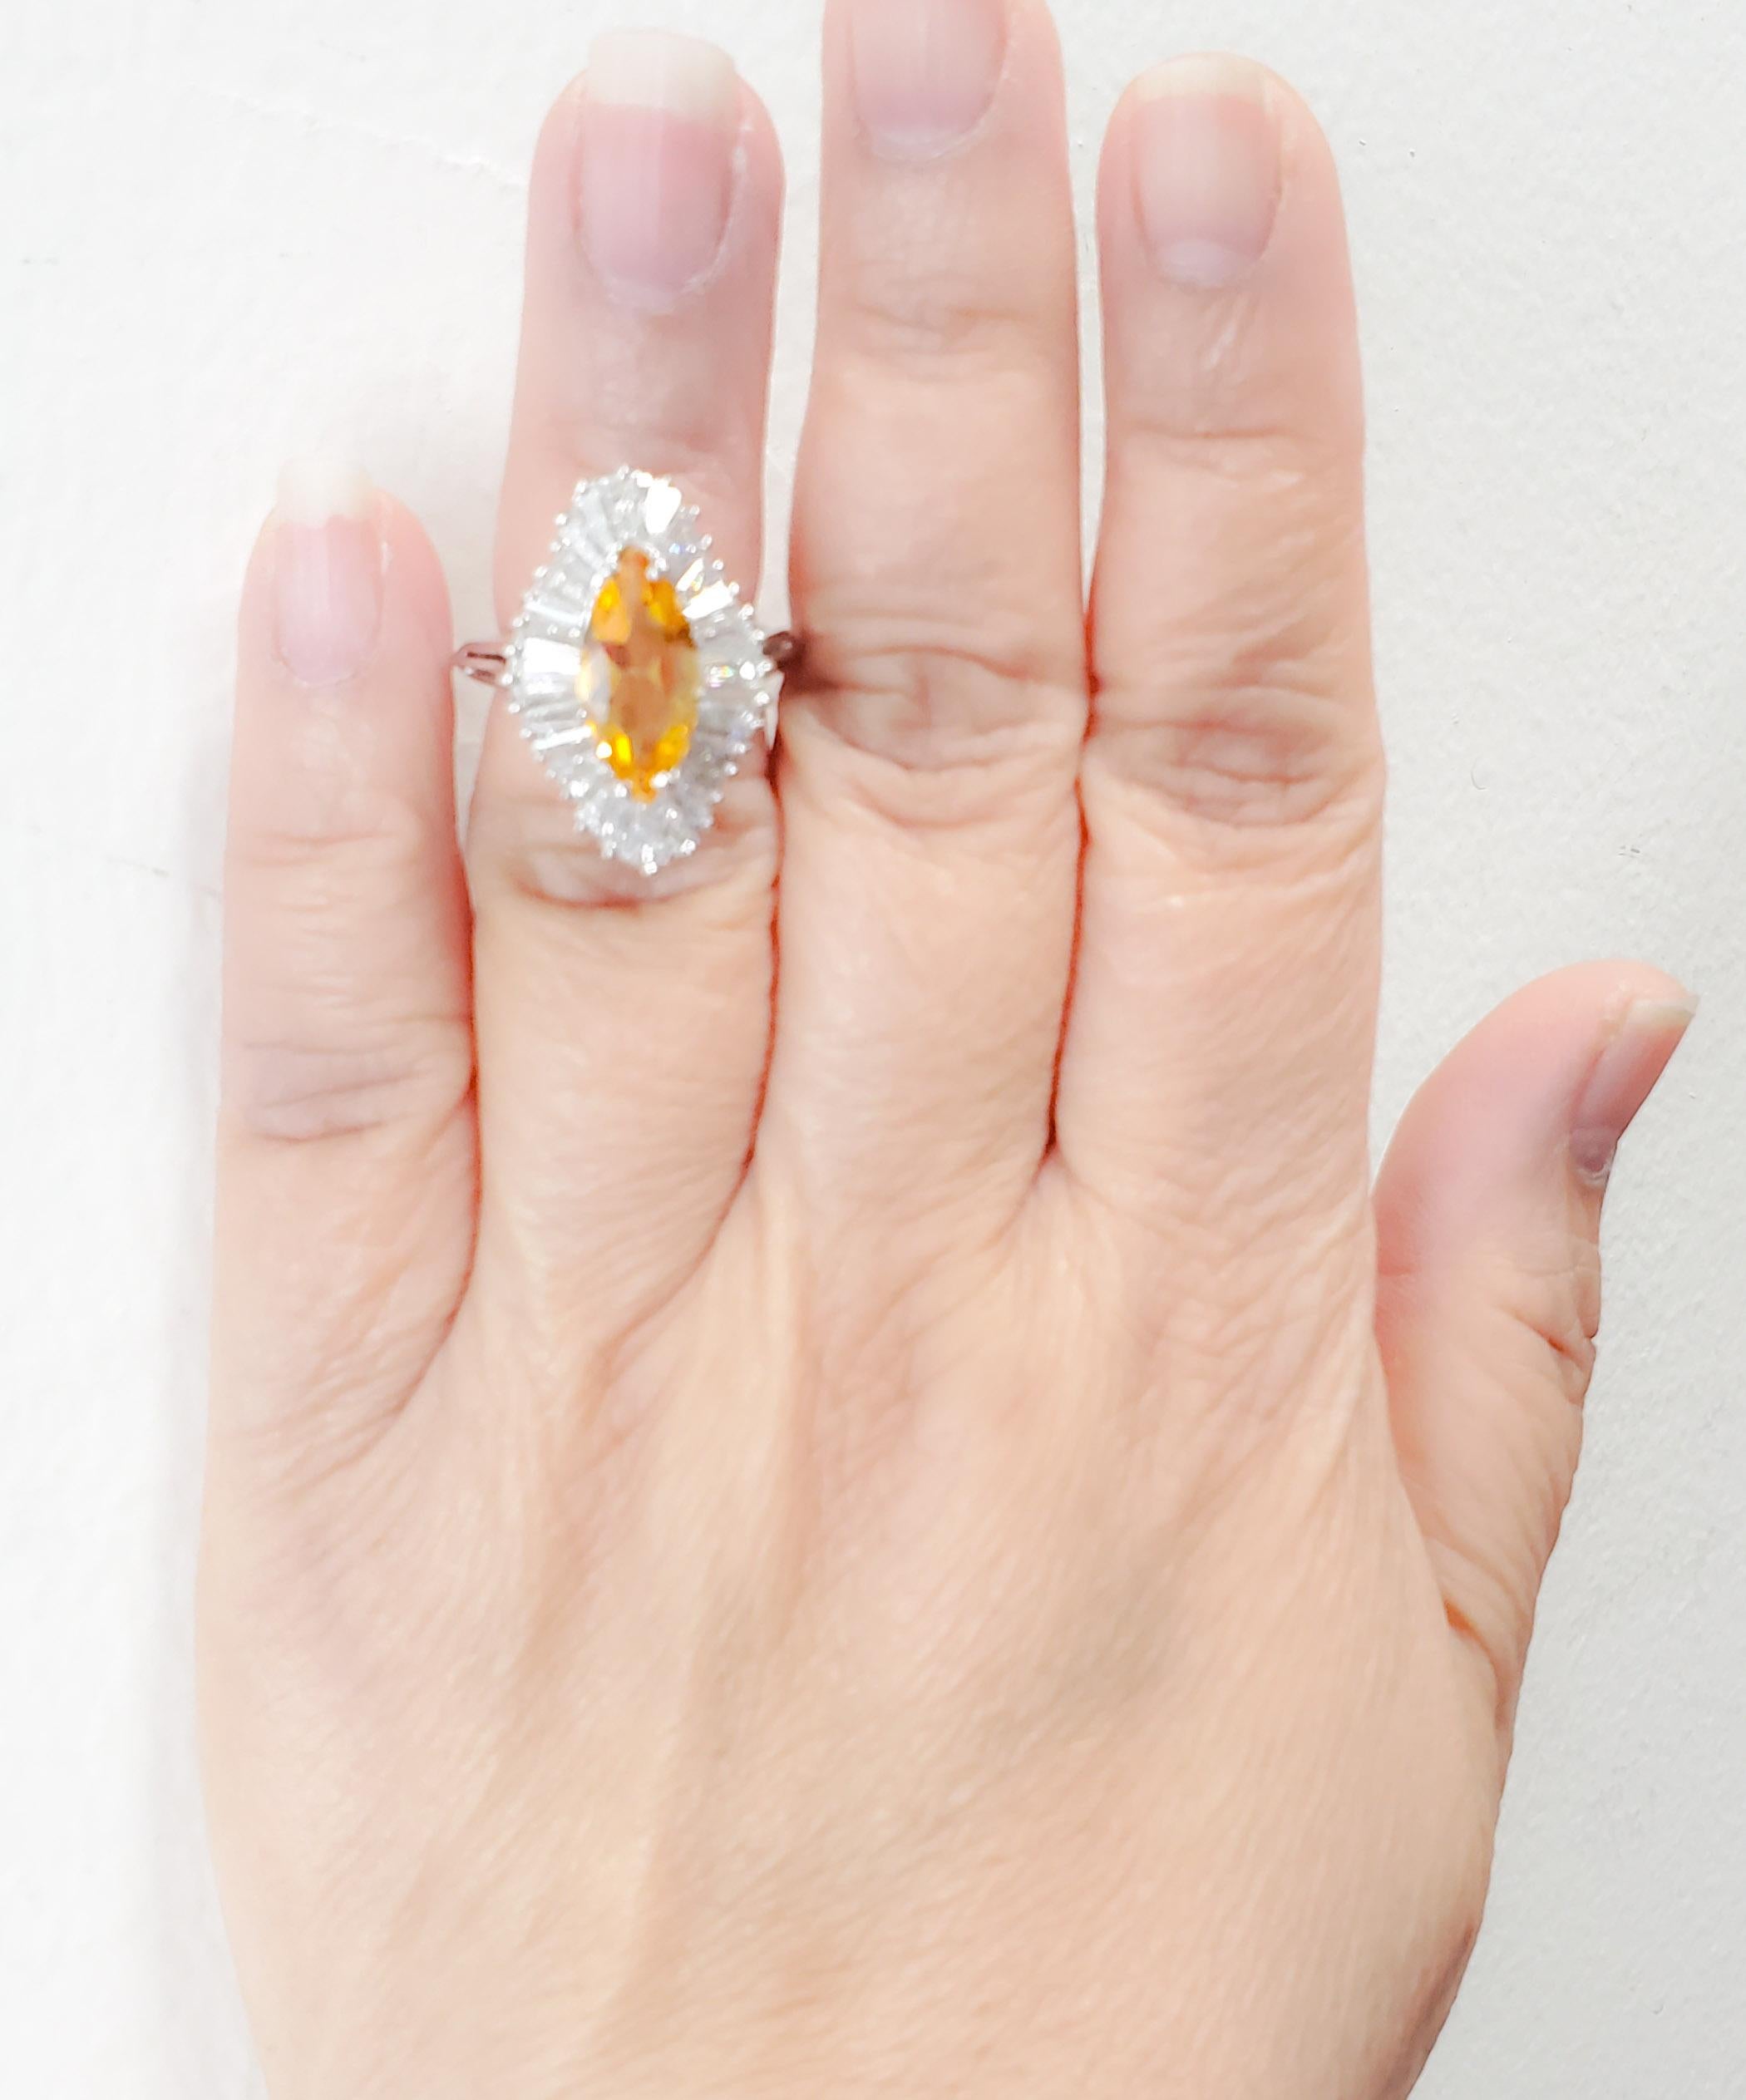 Beautiful 2.09 ct. citrine marquise with good quality white diamond baguettes.  Diamond weight is approximately 1.00 ct.  Handmade in 14k white gold.  Ring size 5.5.